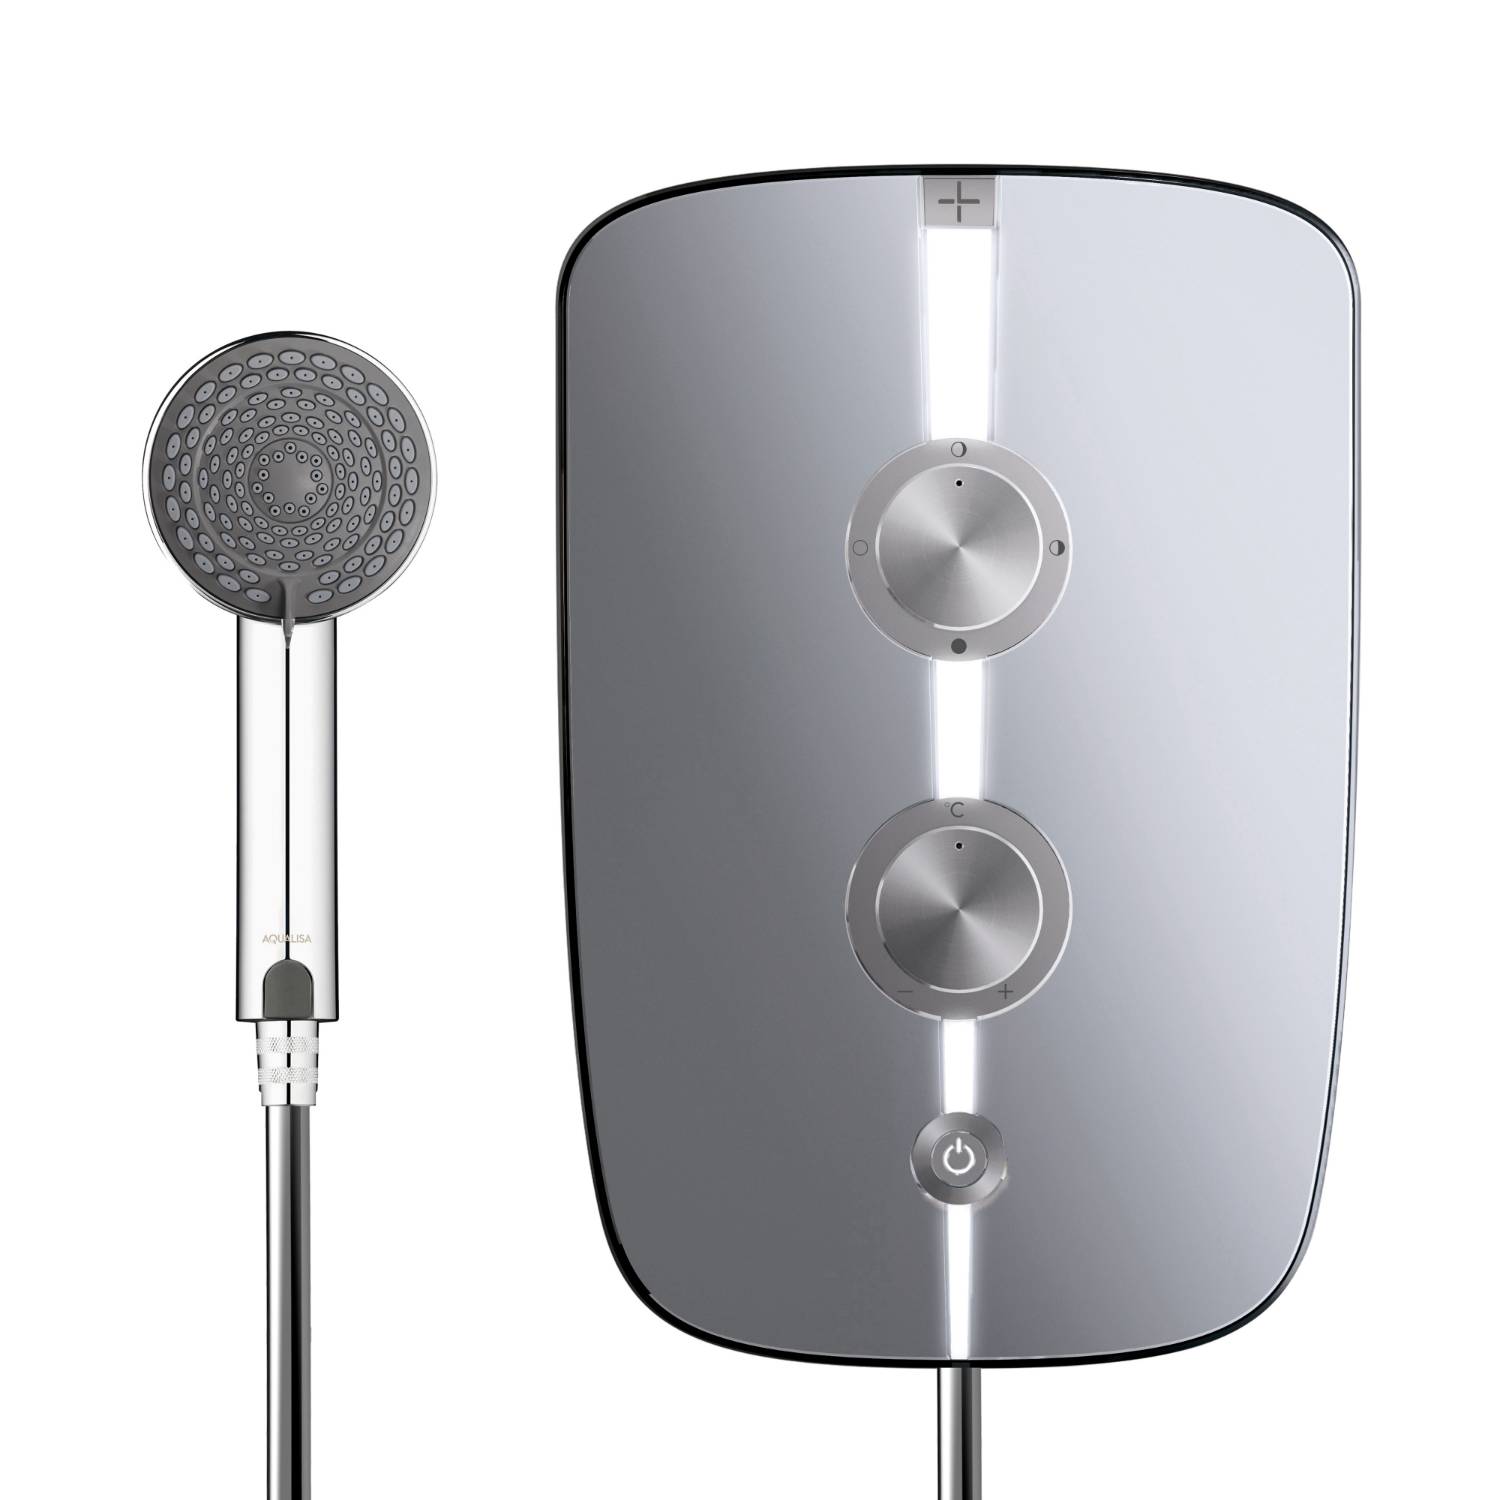 Lumi+ Electric Shower - Electric Shower